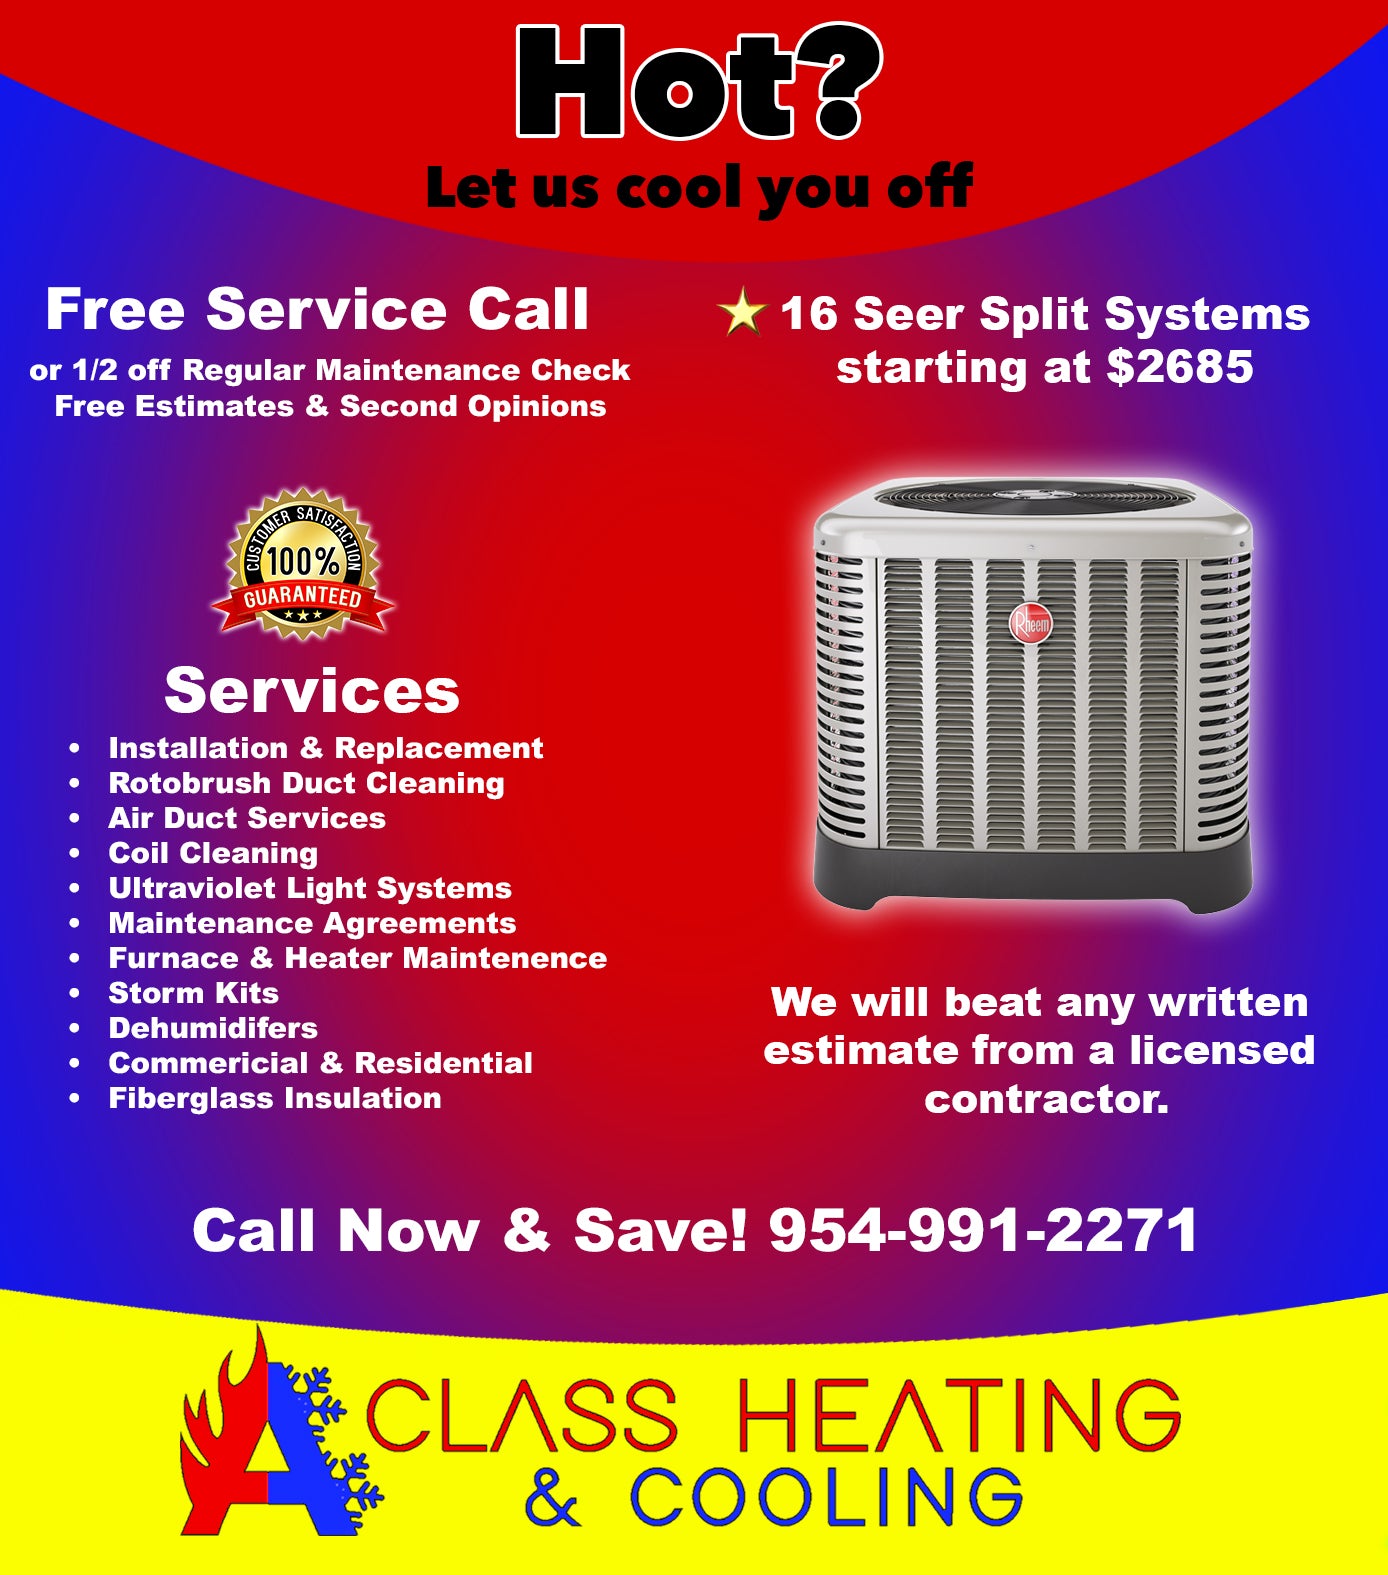 HVAC Deals in Florida by A Class Heating & Cooling